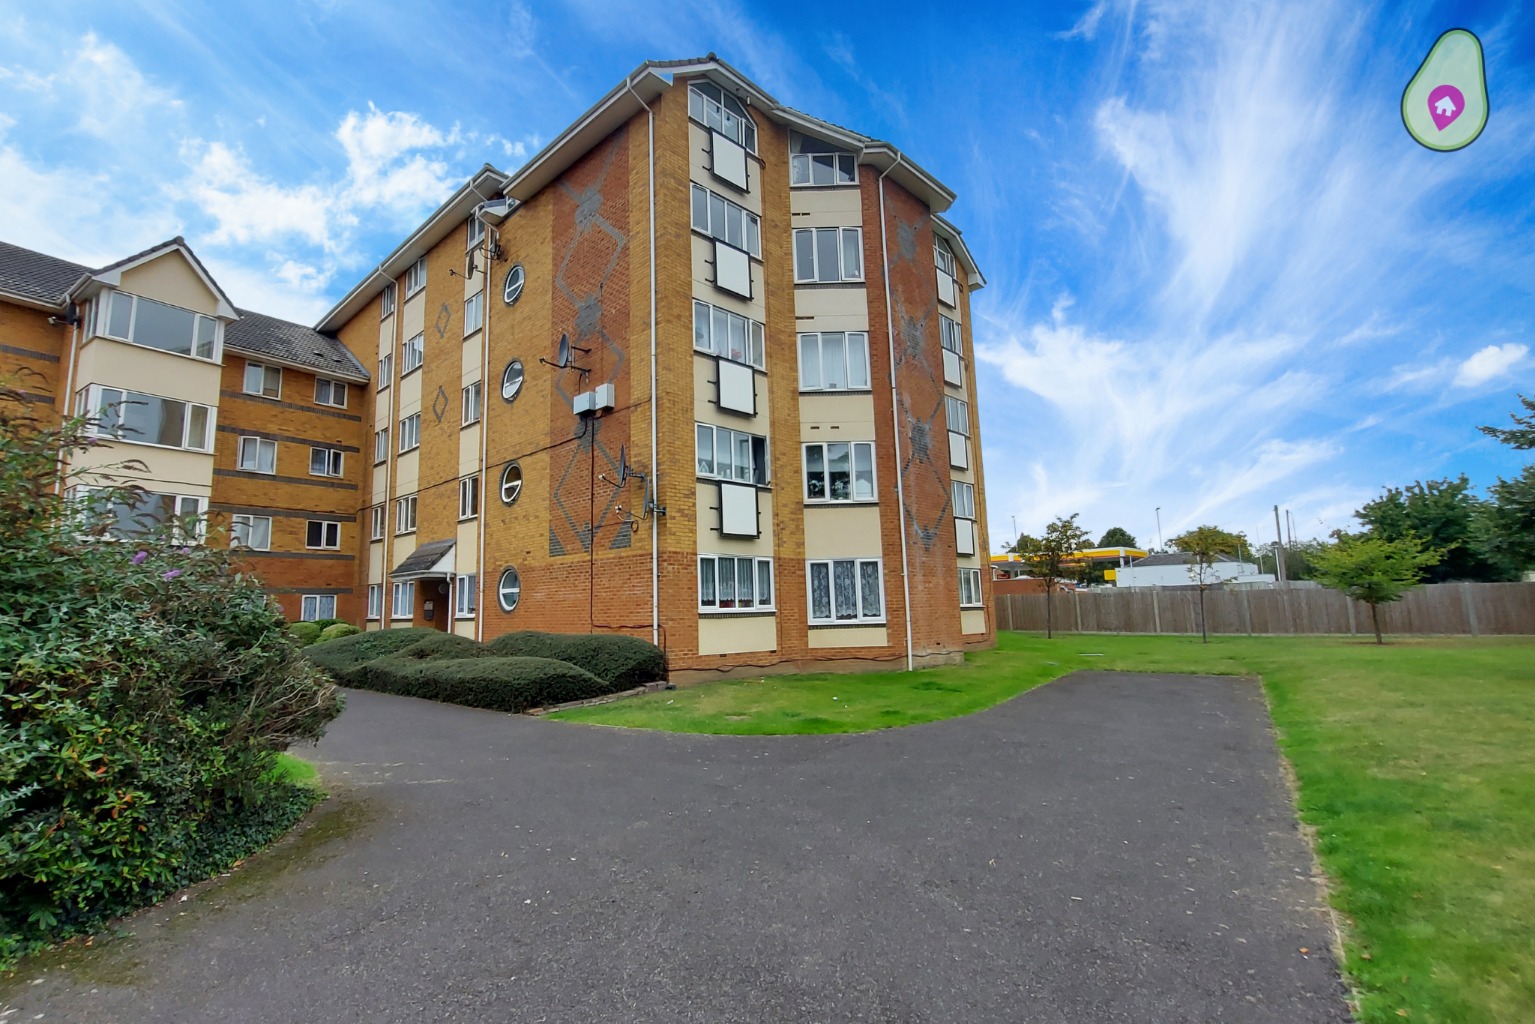 If you are looking for a spacious apartment with just a short journey to Reading Town Centre, then look no further. This spacious third floor apartment would make an ideal first time or investment purchase.